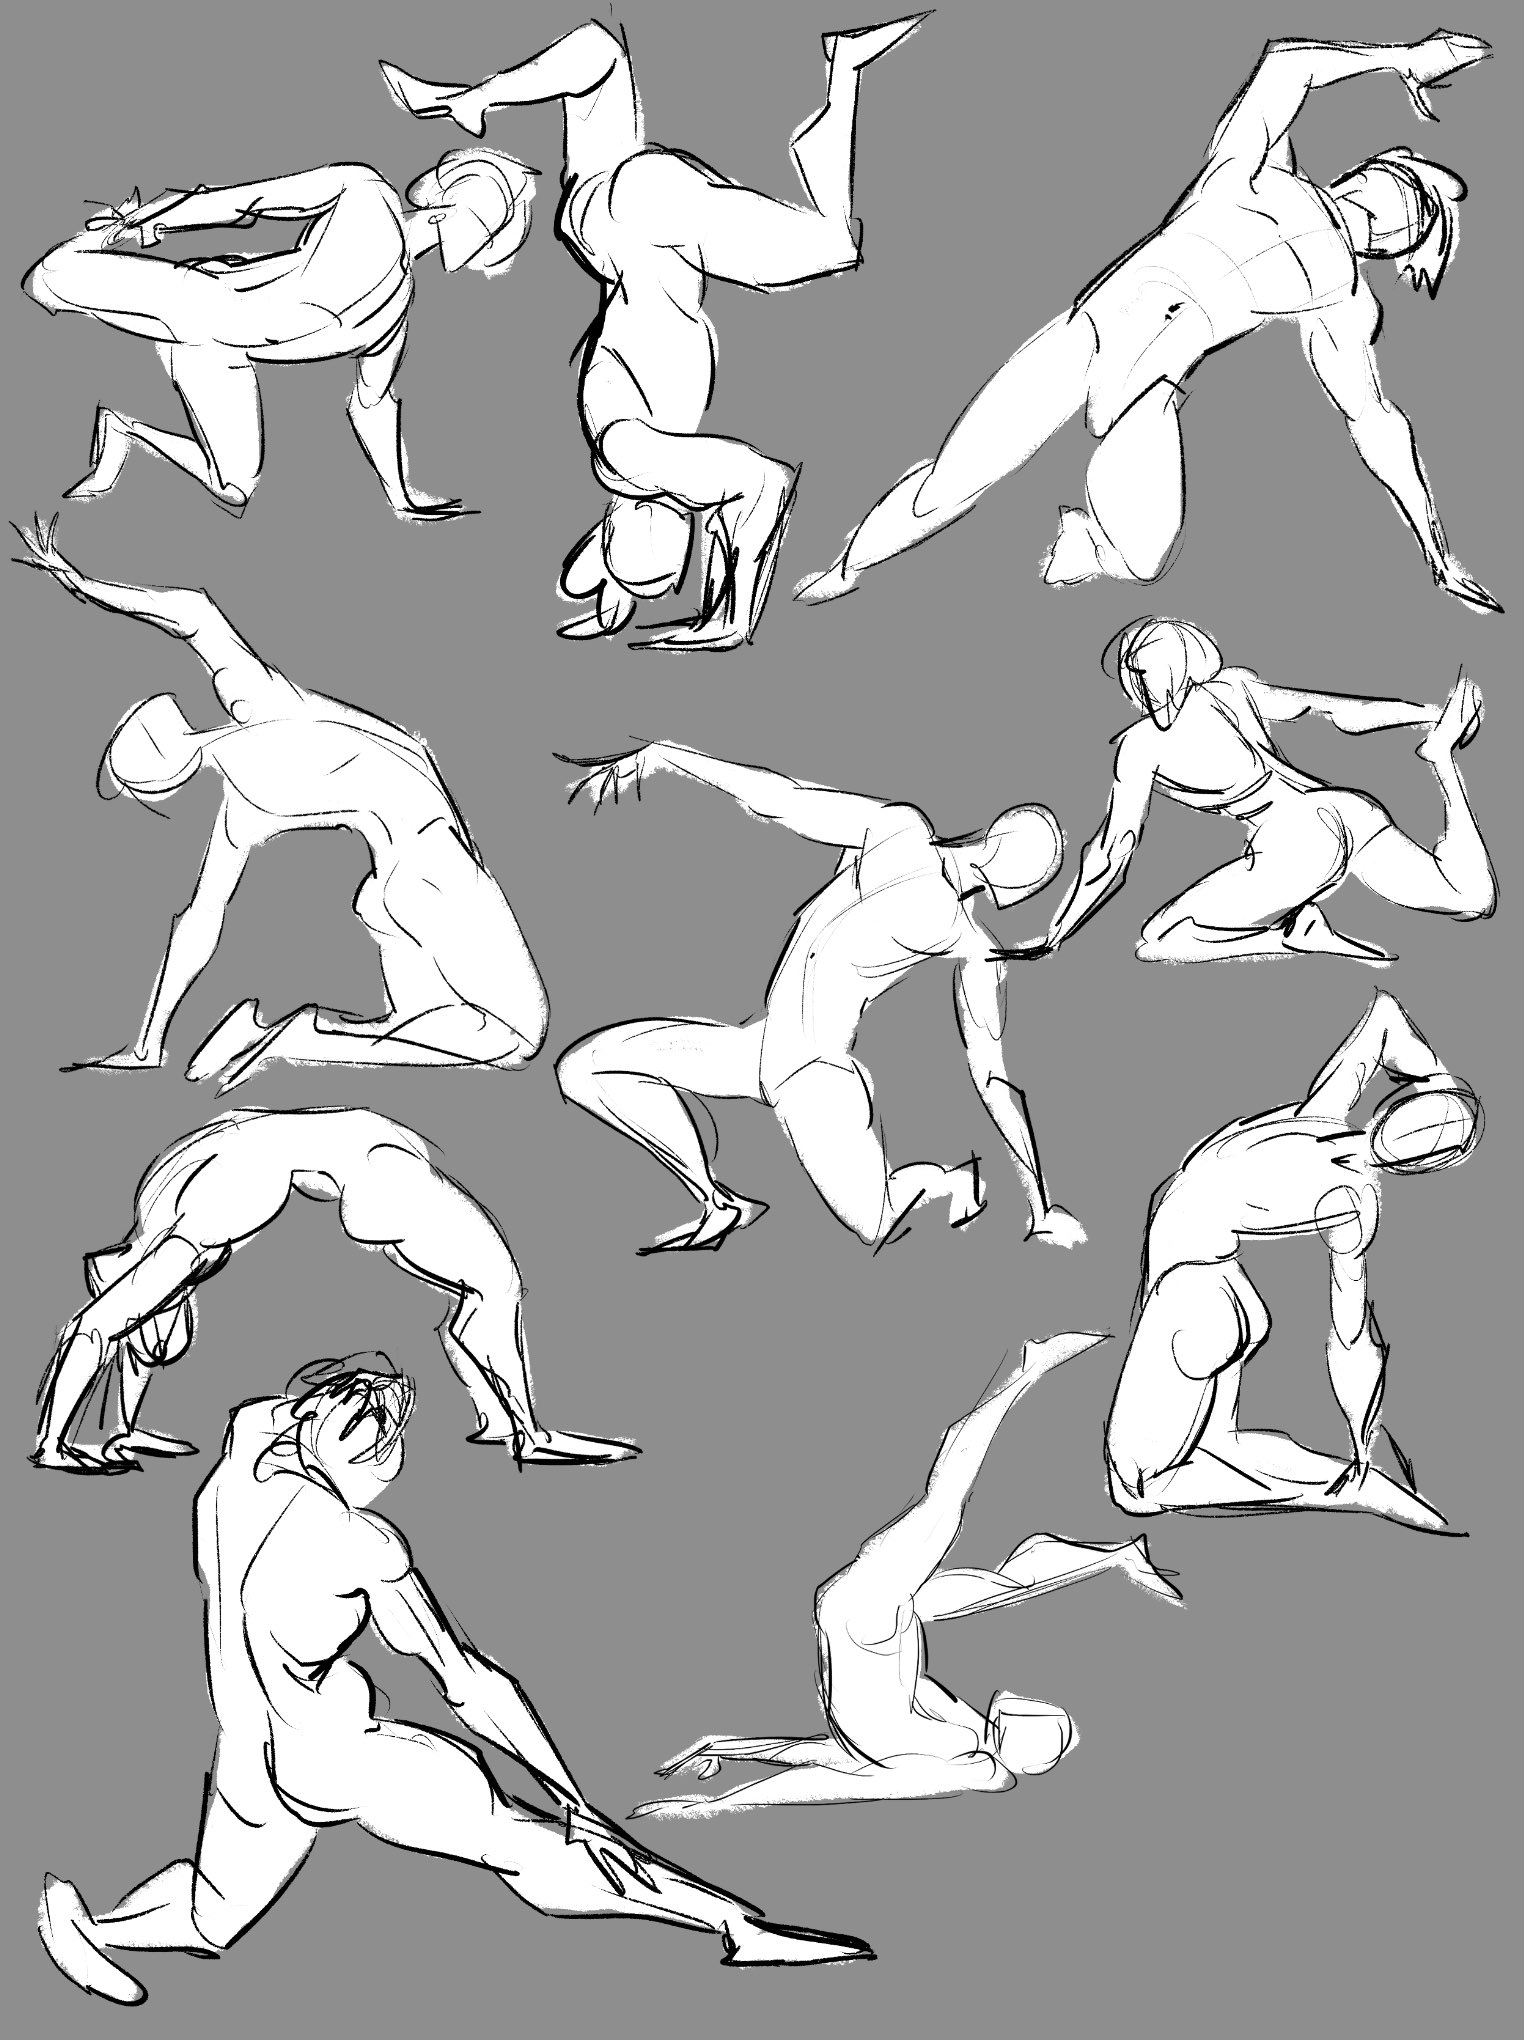 Kelly Turnbull on X: One minute life drawings are stressful, but